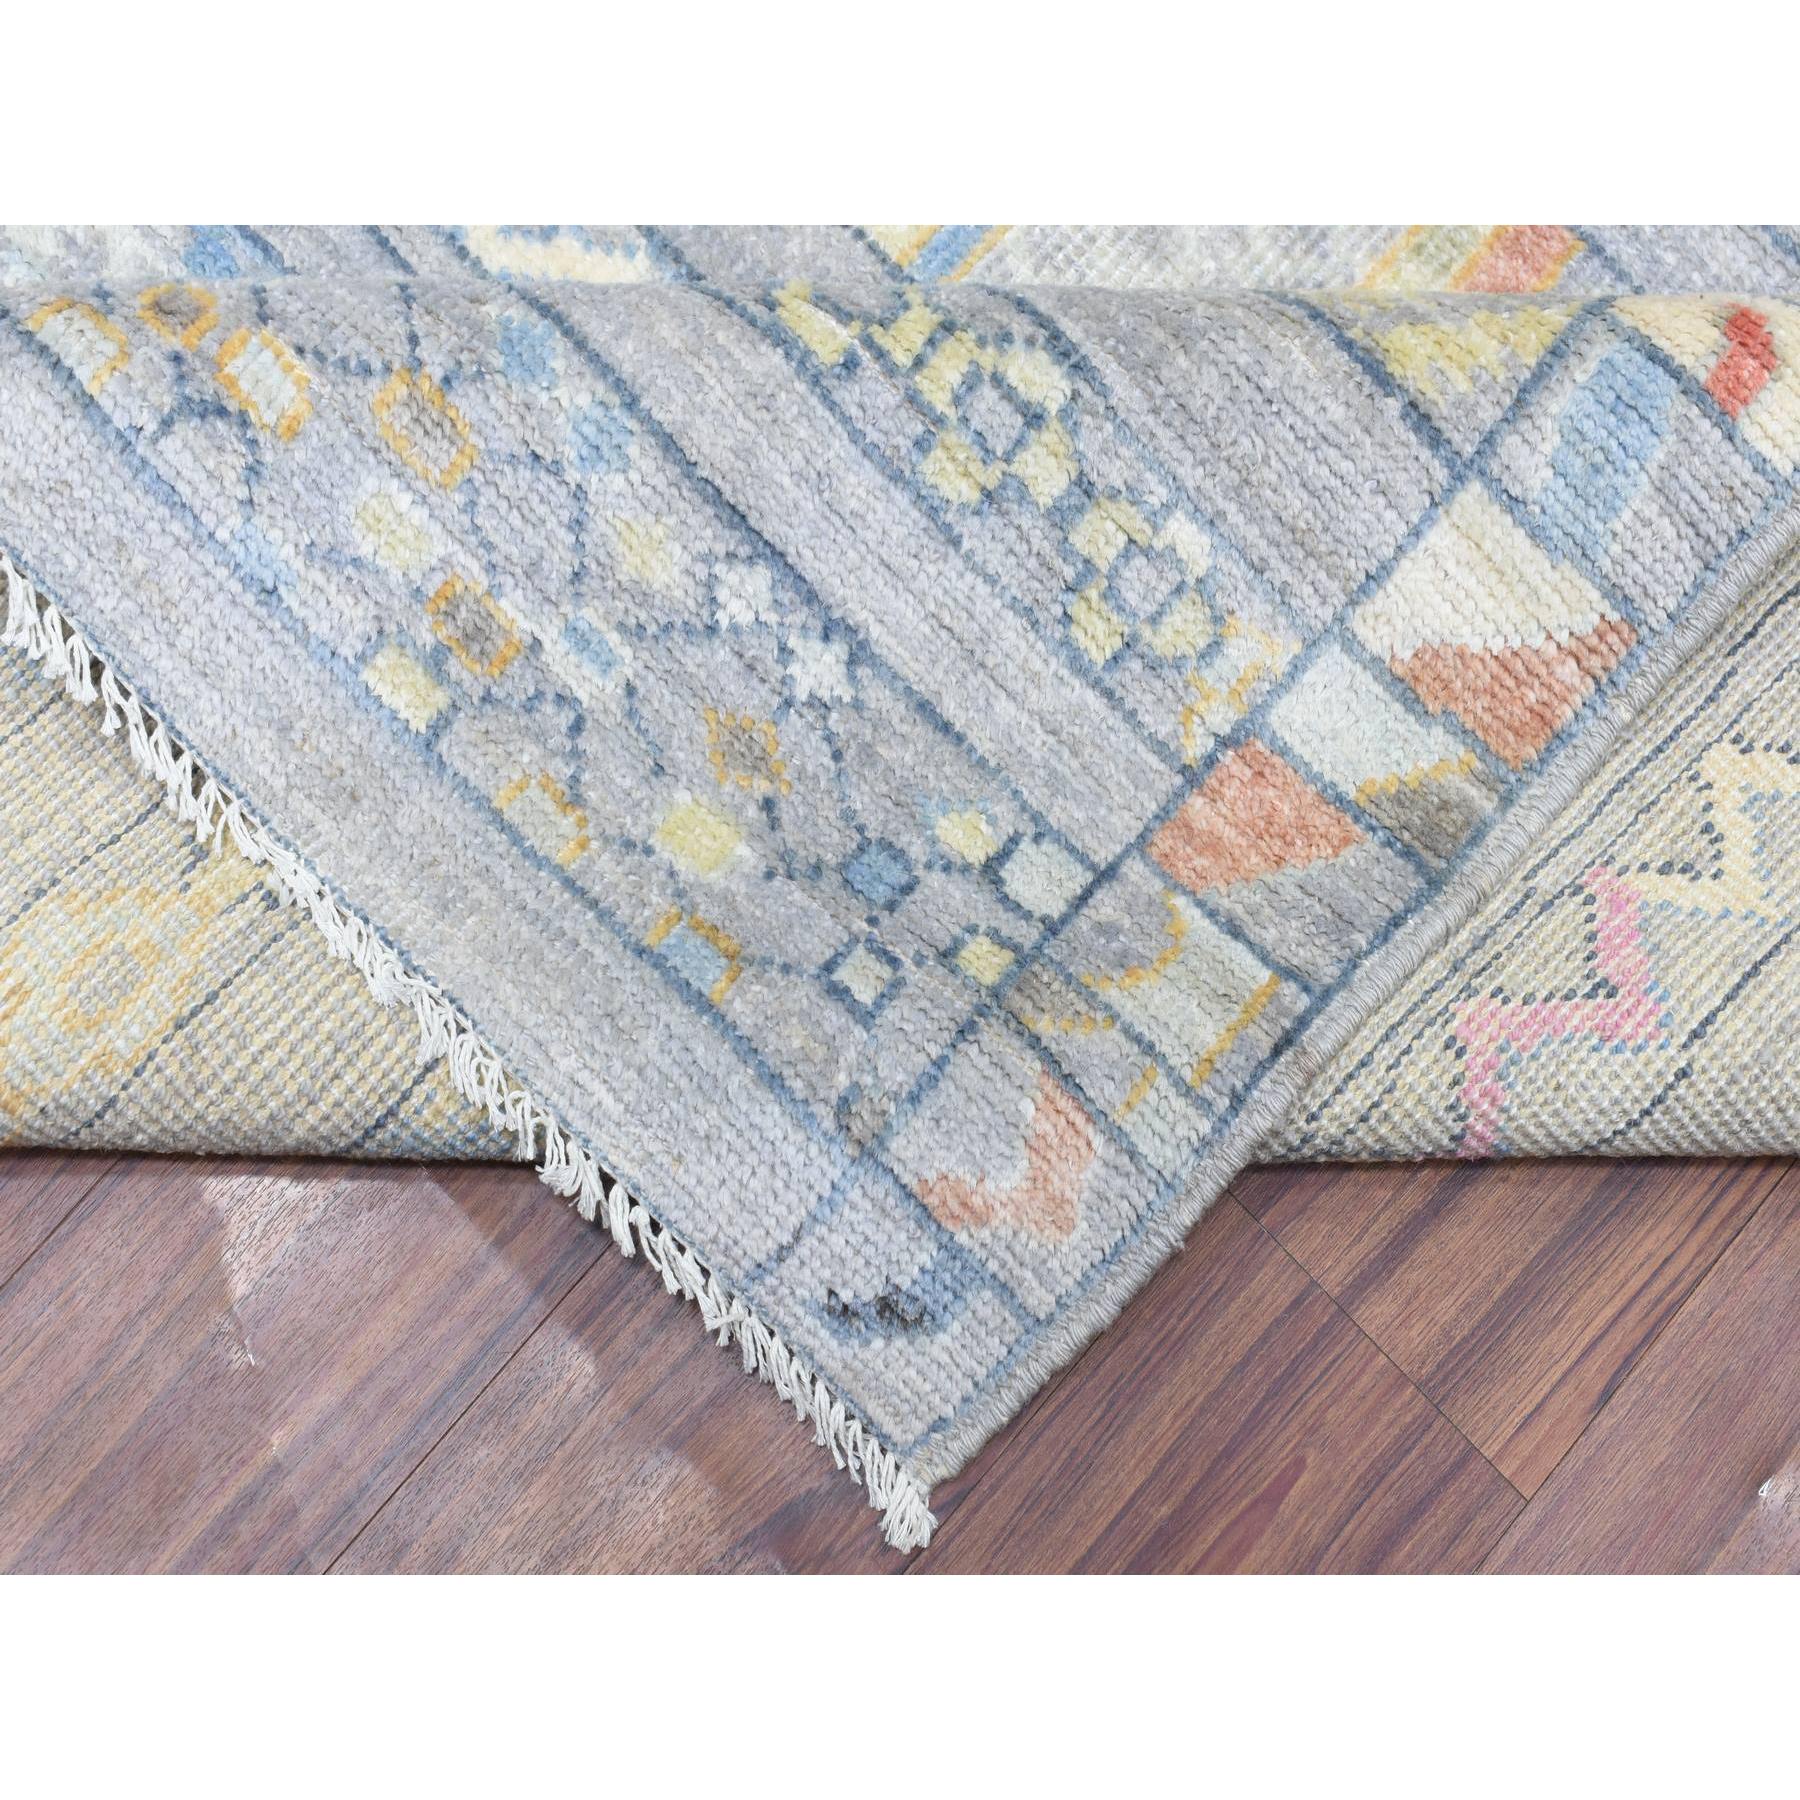 9'1"x11'8" Gray, Hand Woven Anatolian Village Inspired With Small Triangular Design, Natural Wool, Runner Oriental Rug 